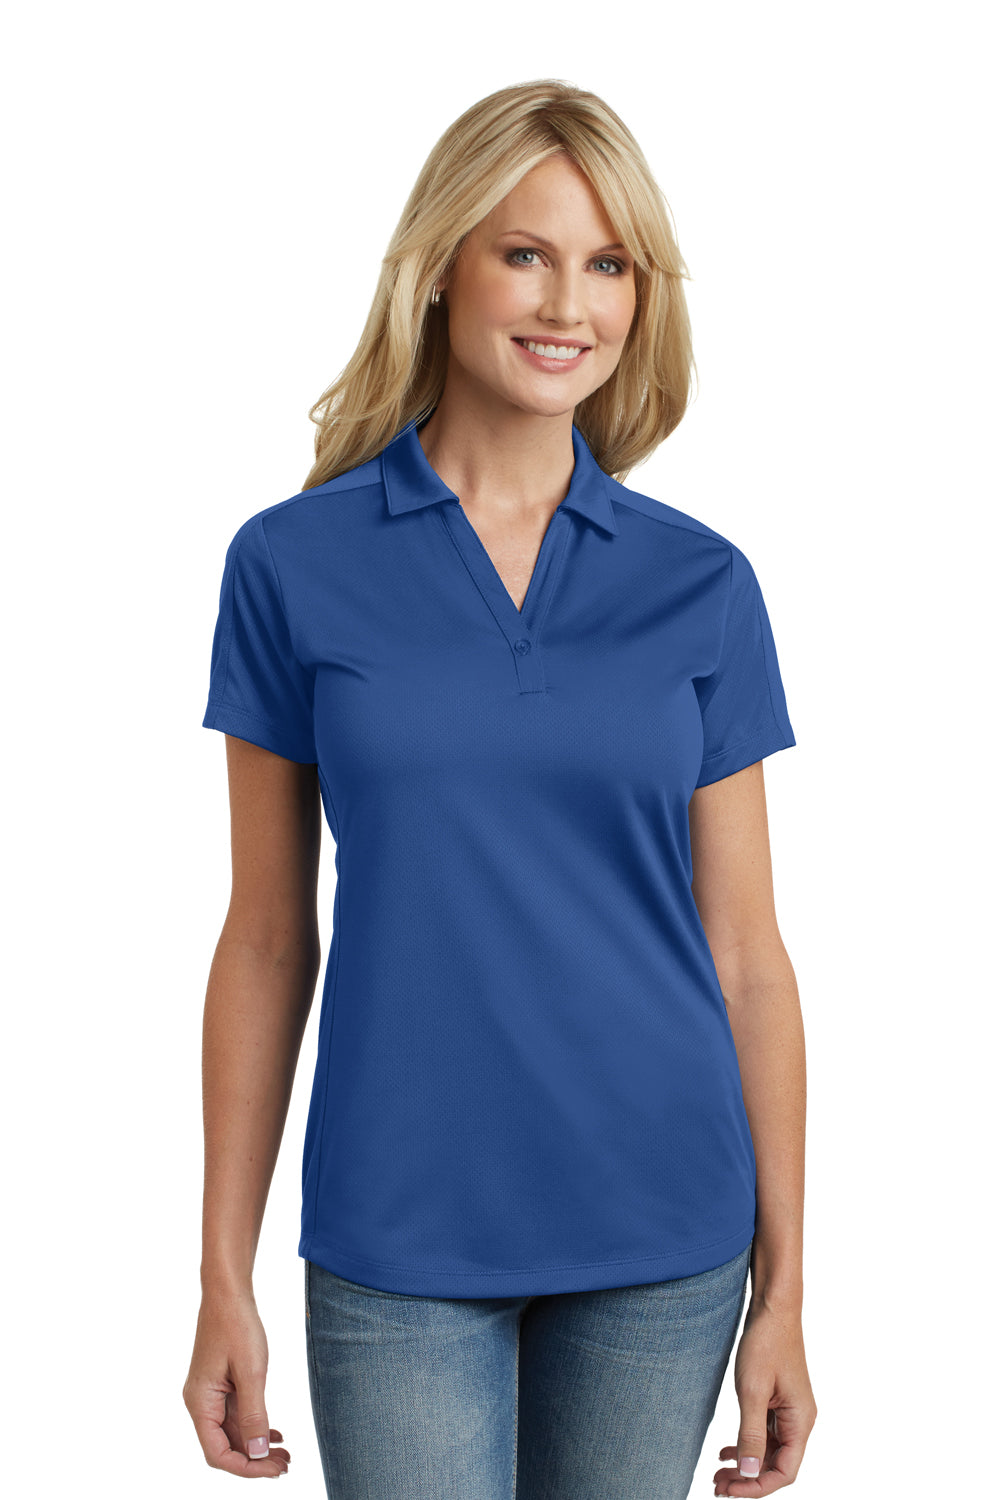 Port Authority L569 Womens Moisture Wicking Short Sleeve Polo Shirt Royal Blue Front